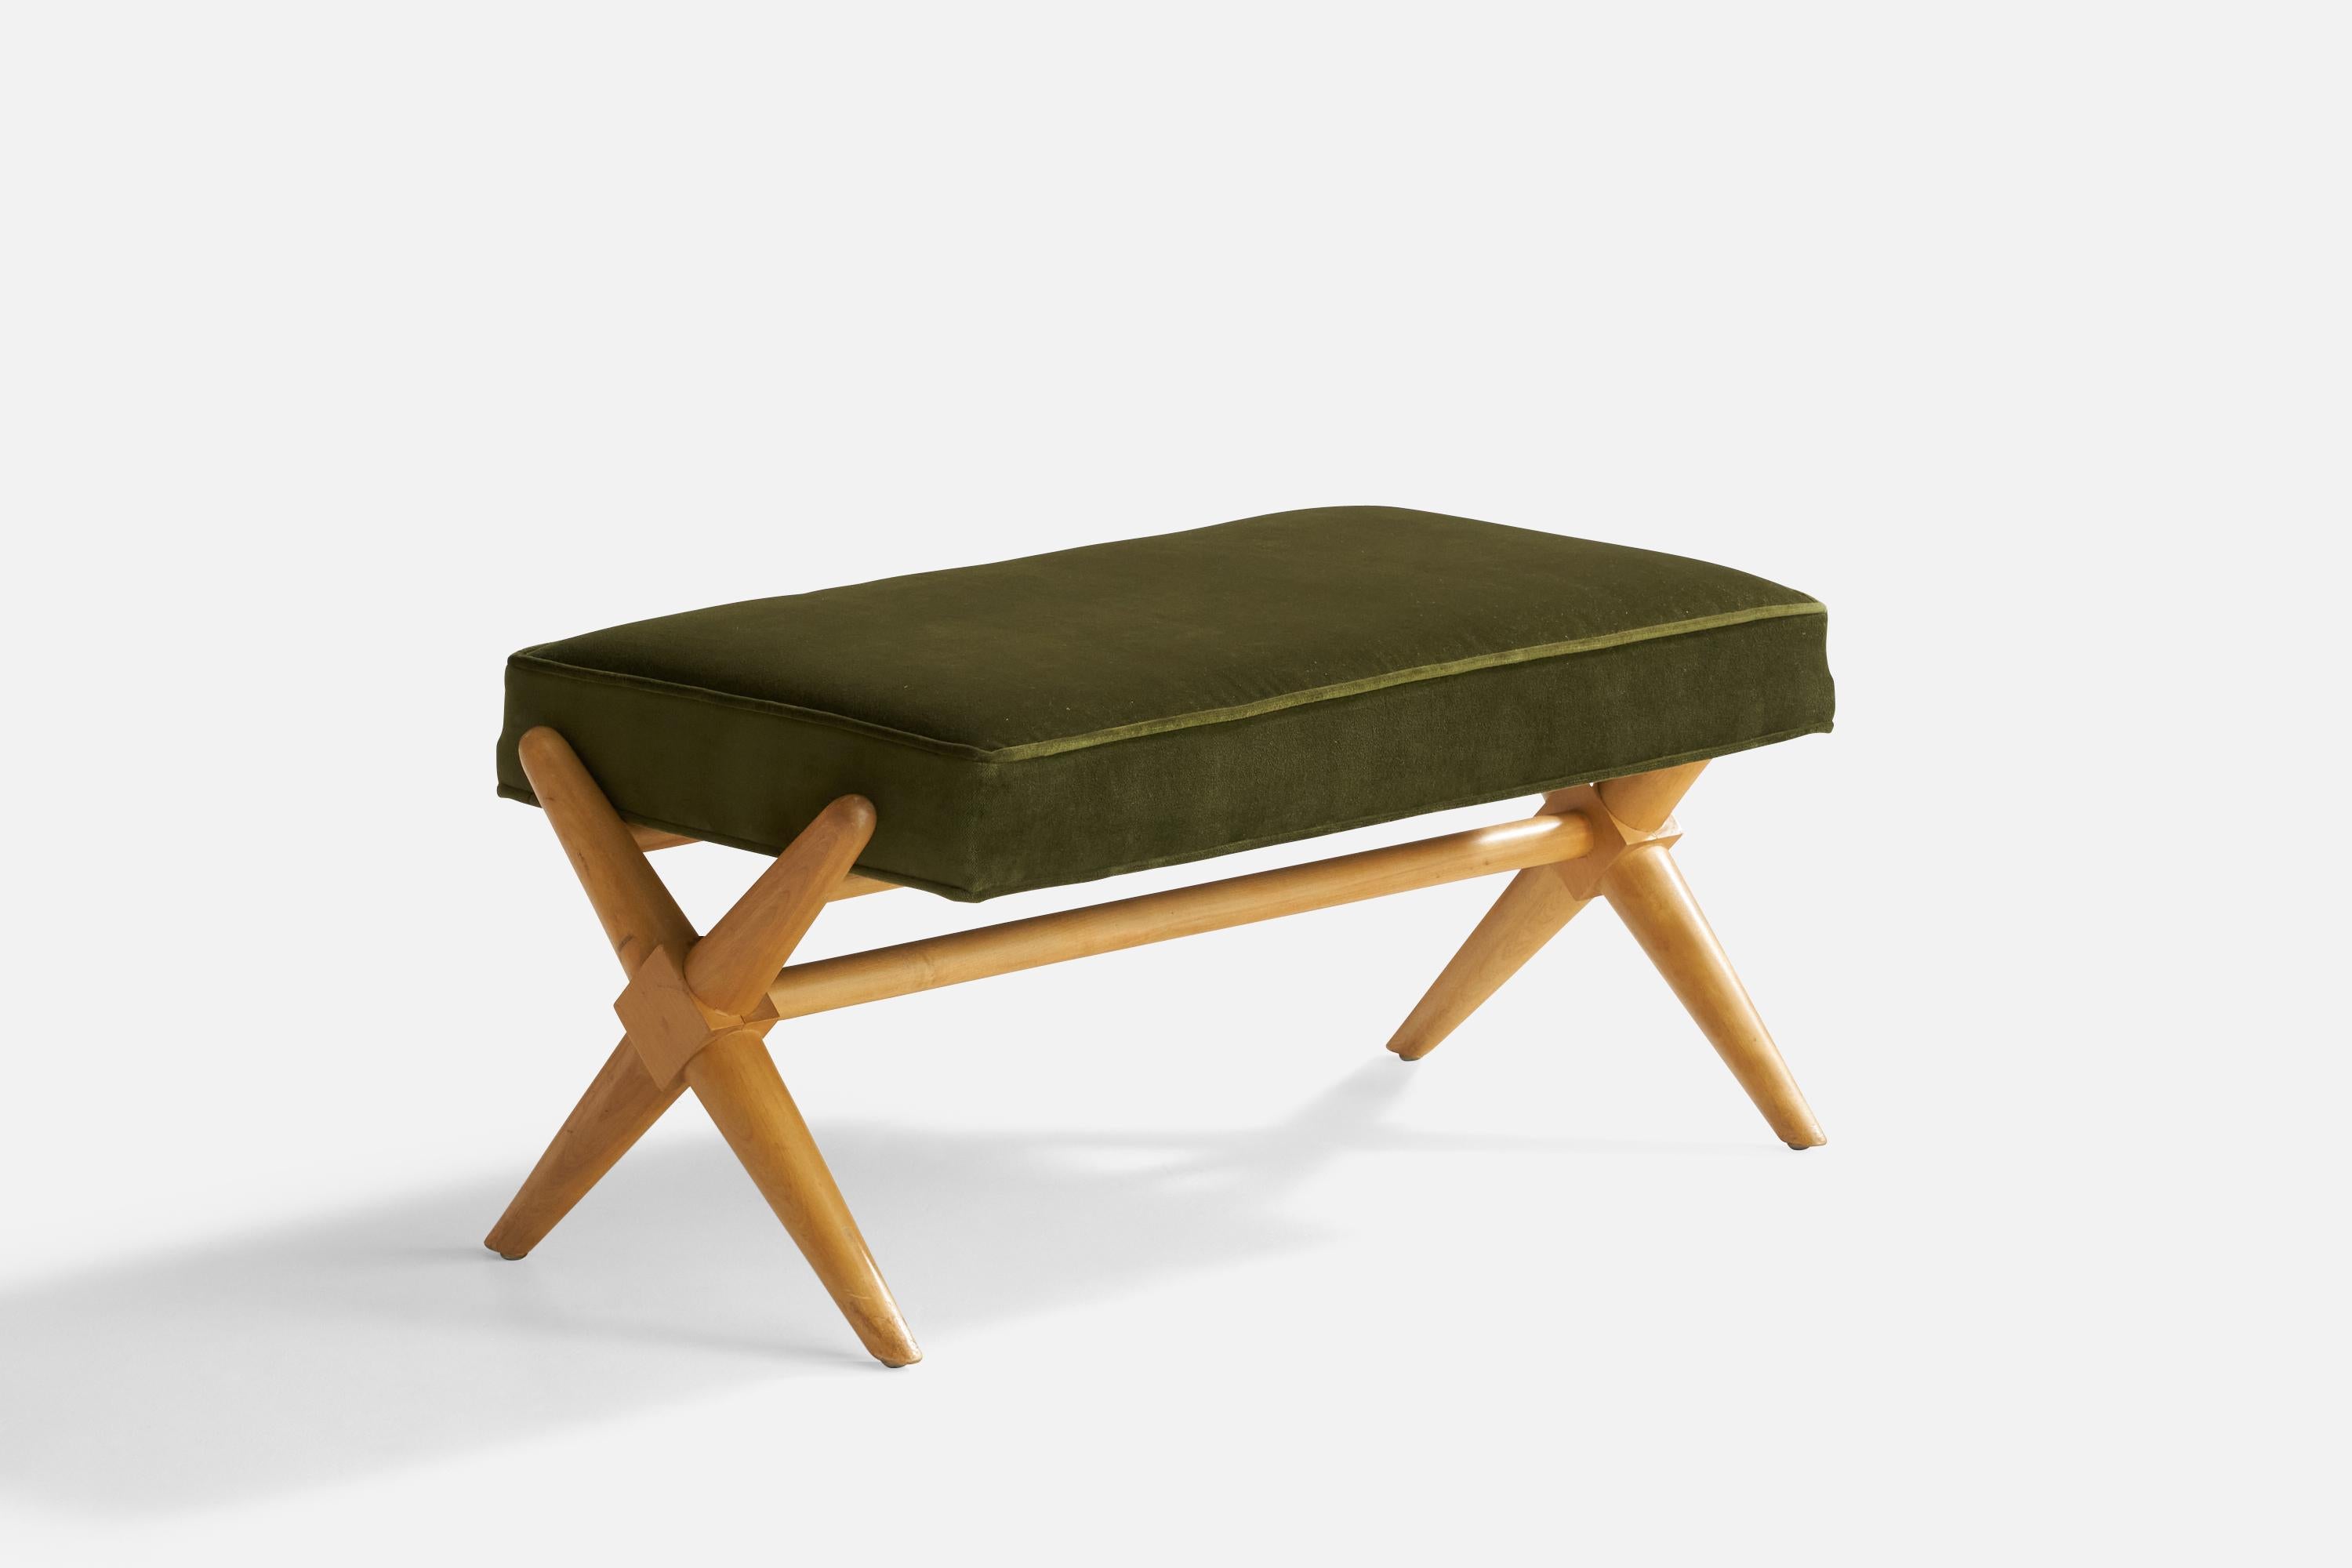 An oak and green velvet fabric bench designed by T.H. Robsjohn-Gibbings and produced by Widdicomb, Grand Rapids, Michigan, USA, 1950s.

Seat height 15.5